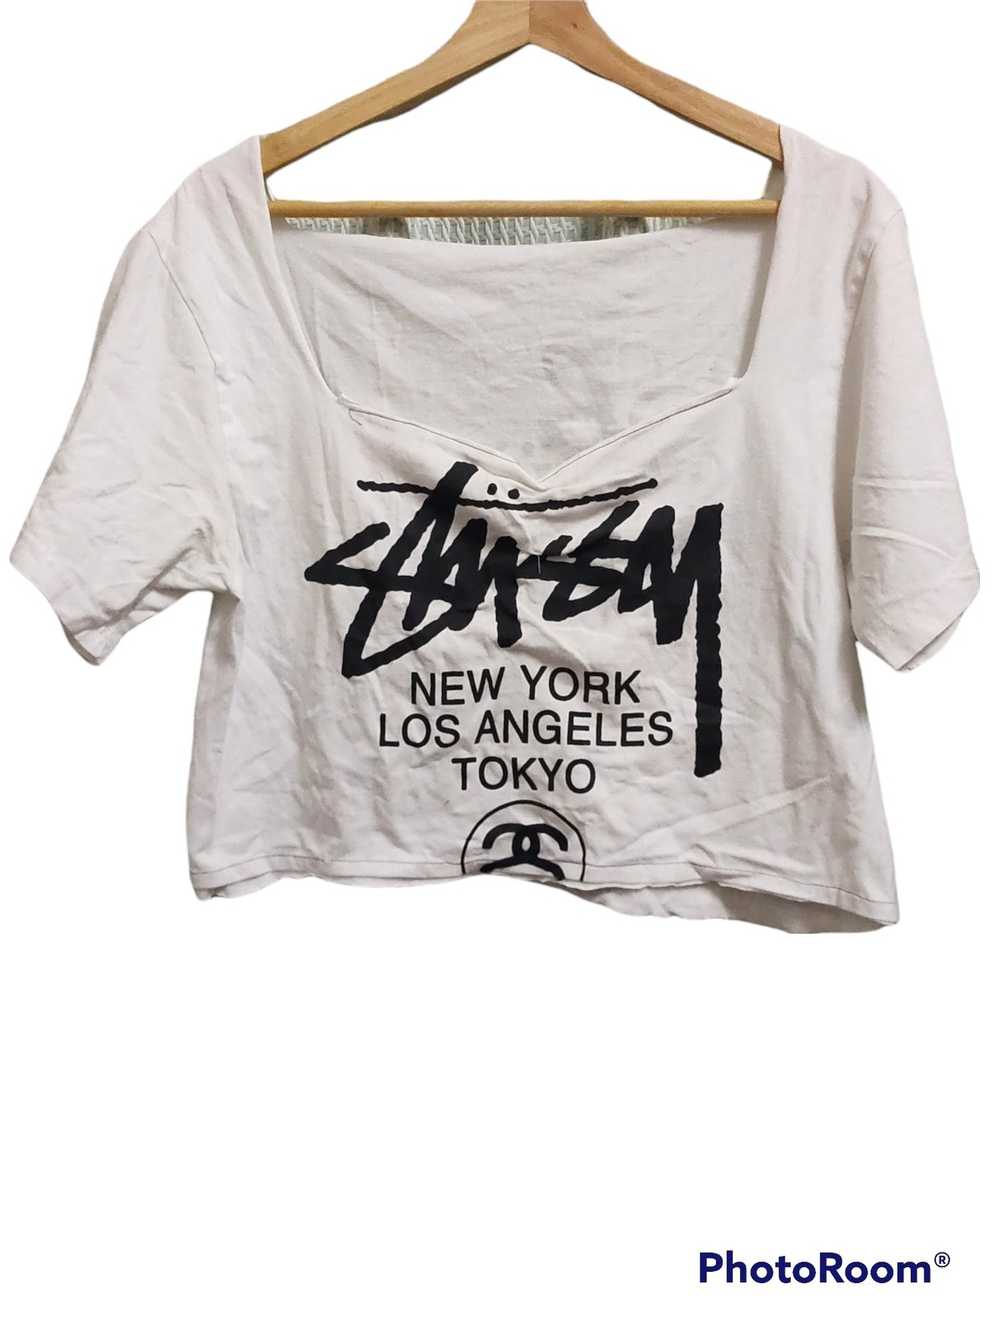 Stussy STUSSY custom made tank tops special - image 1